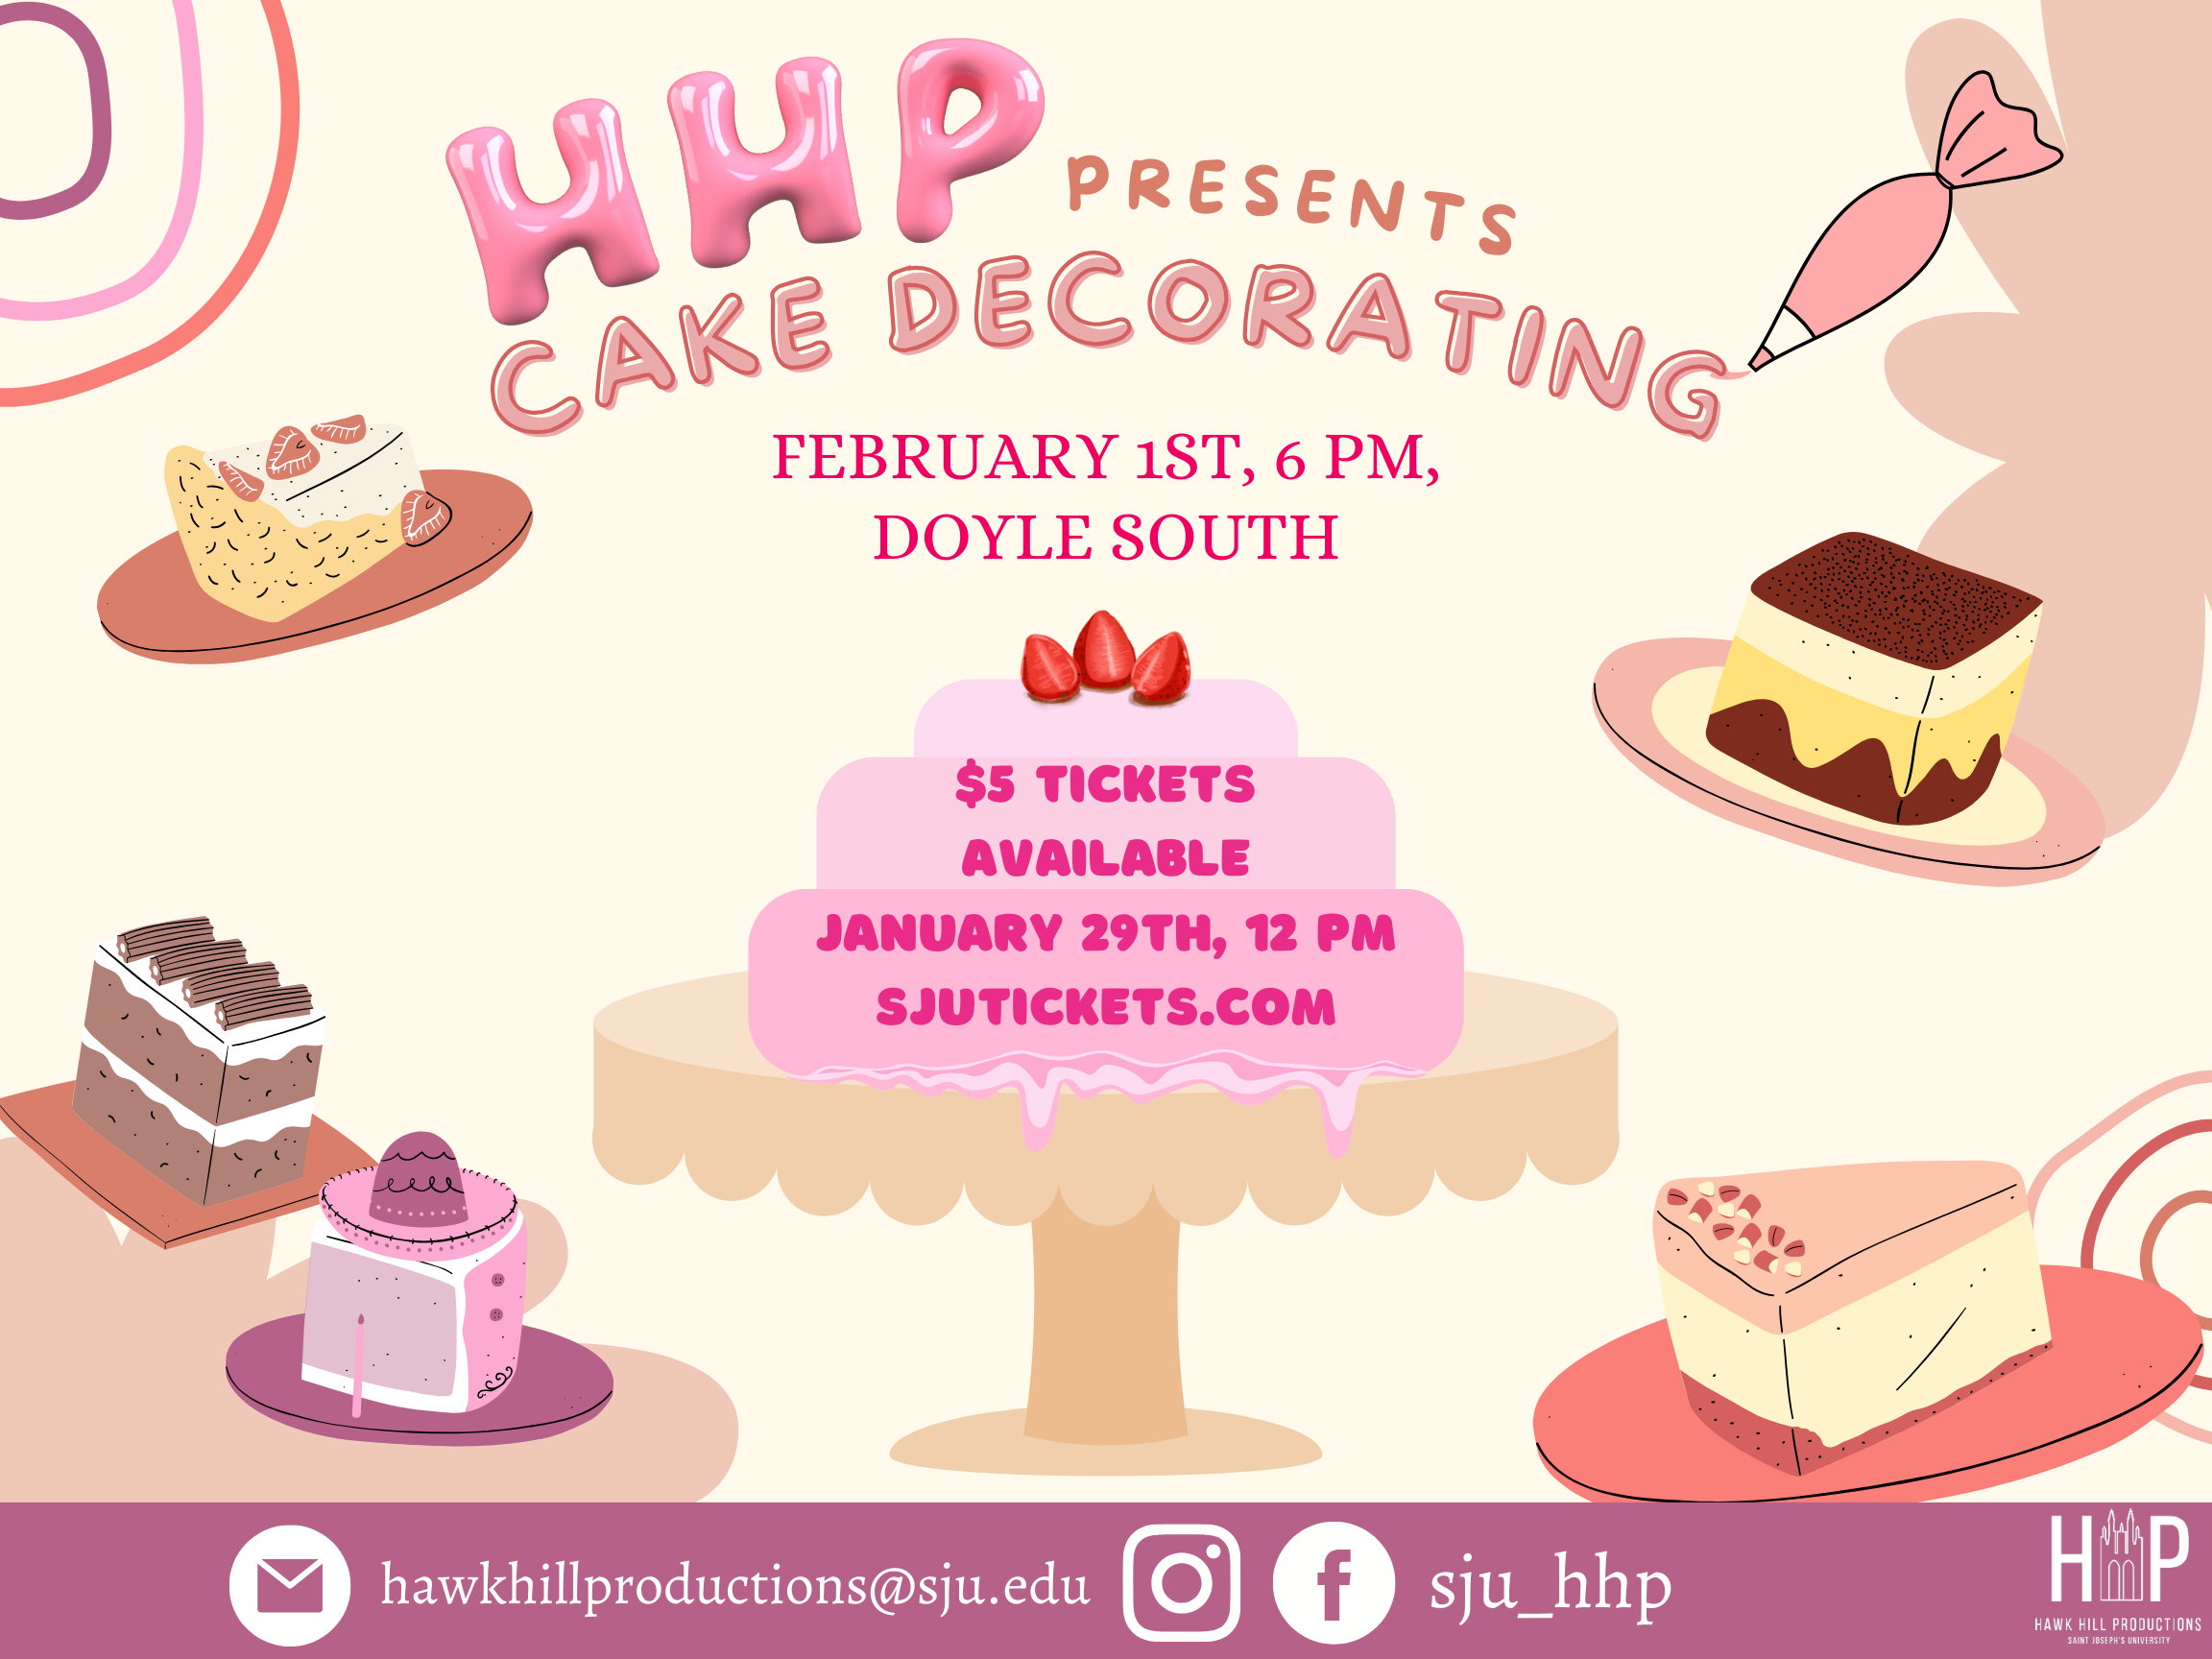 This image depicts a Flyer for a Cake Decorating  event for students at Saint Joseph's University. The background   is almost a light cream color with Bright Pink lettering that looks almost like icing. There are various cakes and baked goods around the flyer with a main layered cake in the center of the flyer. There is text in the center cake providing information about the event. At the bottome of the flyer is the contact info for HHP.